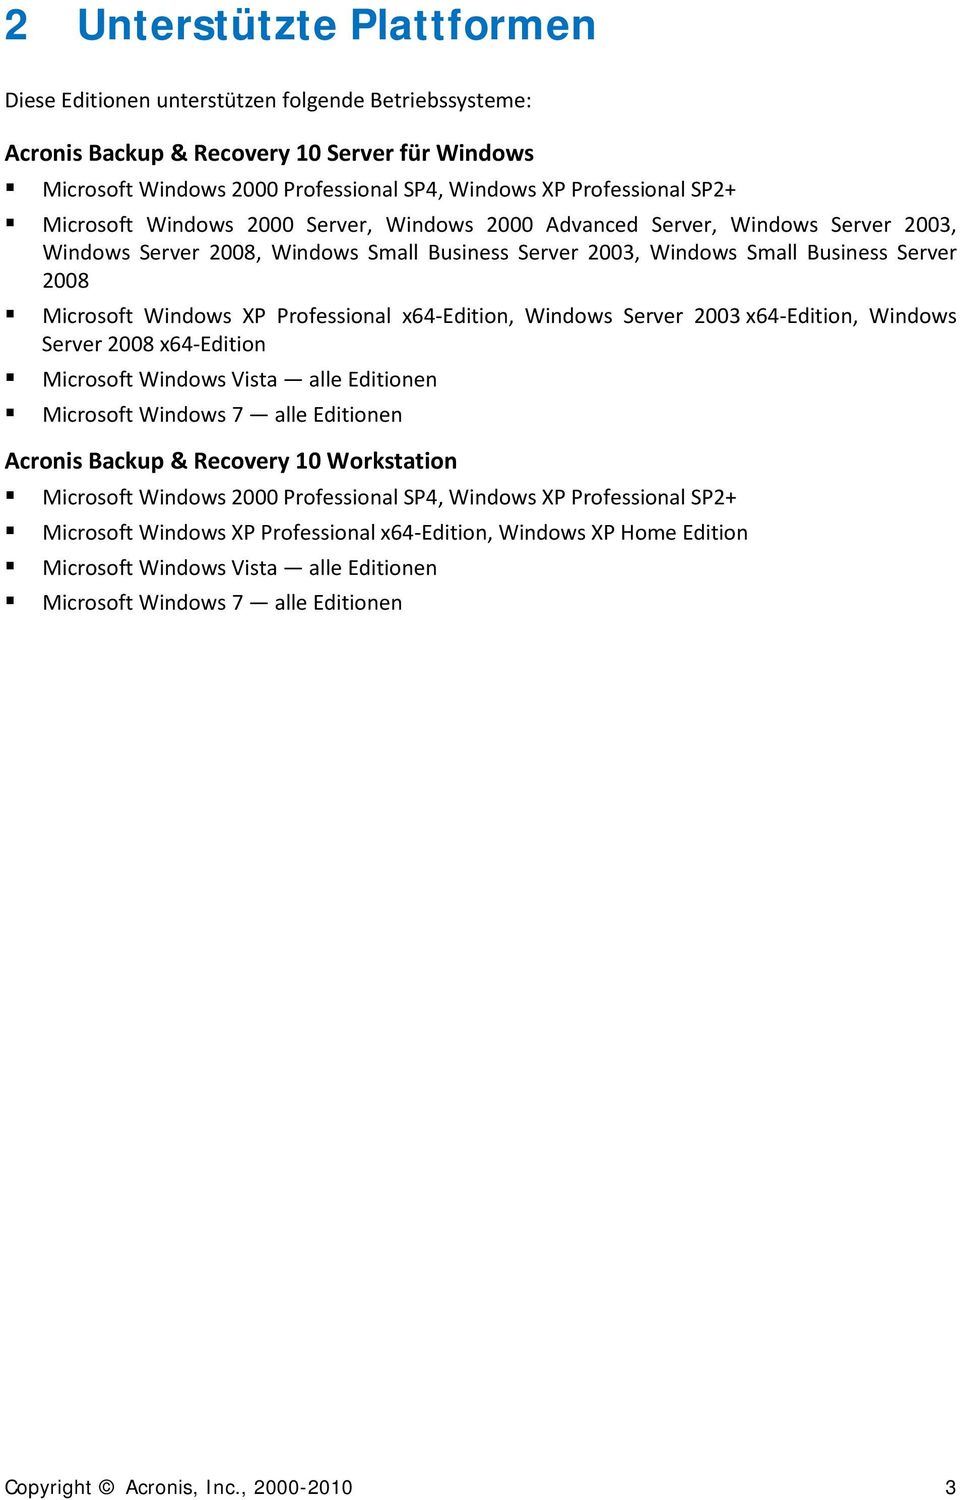 Professional x64-edition, Windows Server 2003 x64-edition, Windows Server 2008 x64-edition Microsoft Windows Vista alle Editionen Microsoft Windows 7 alle Editionen Acronis Backup & Recovery 10